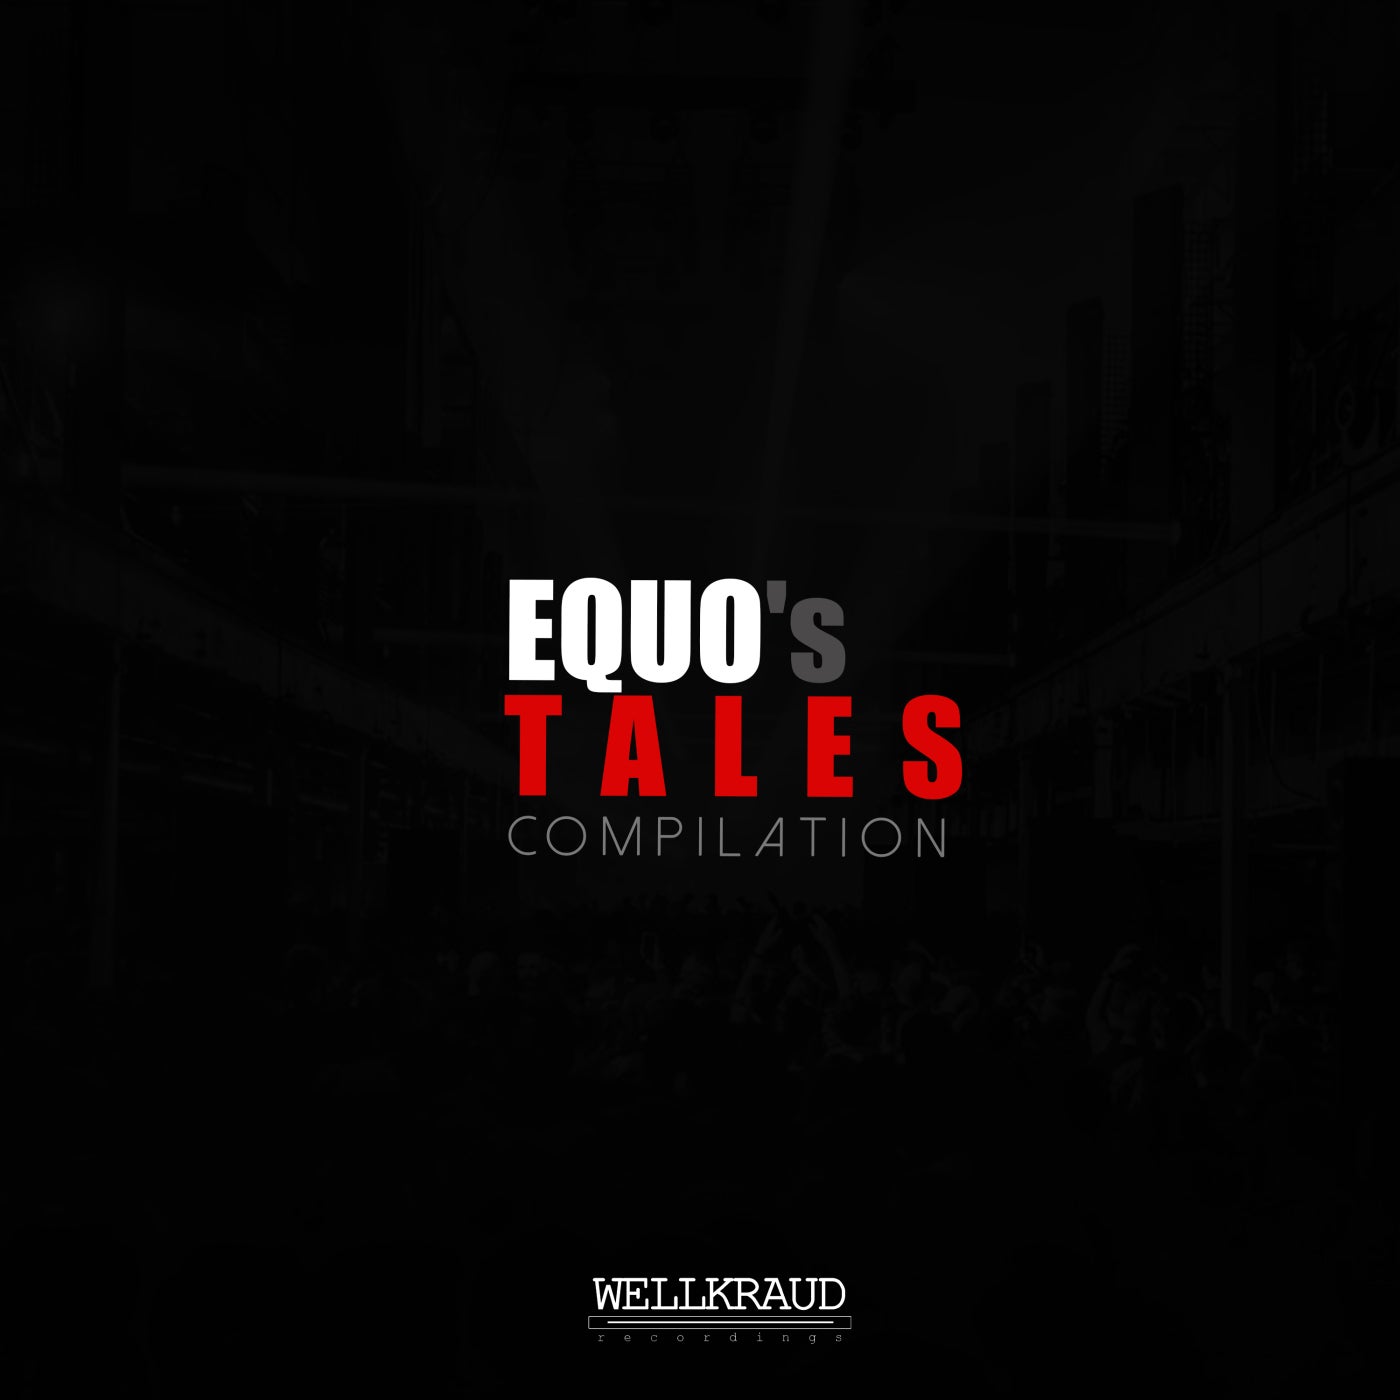 Equo's Tales